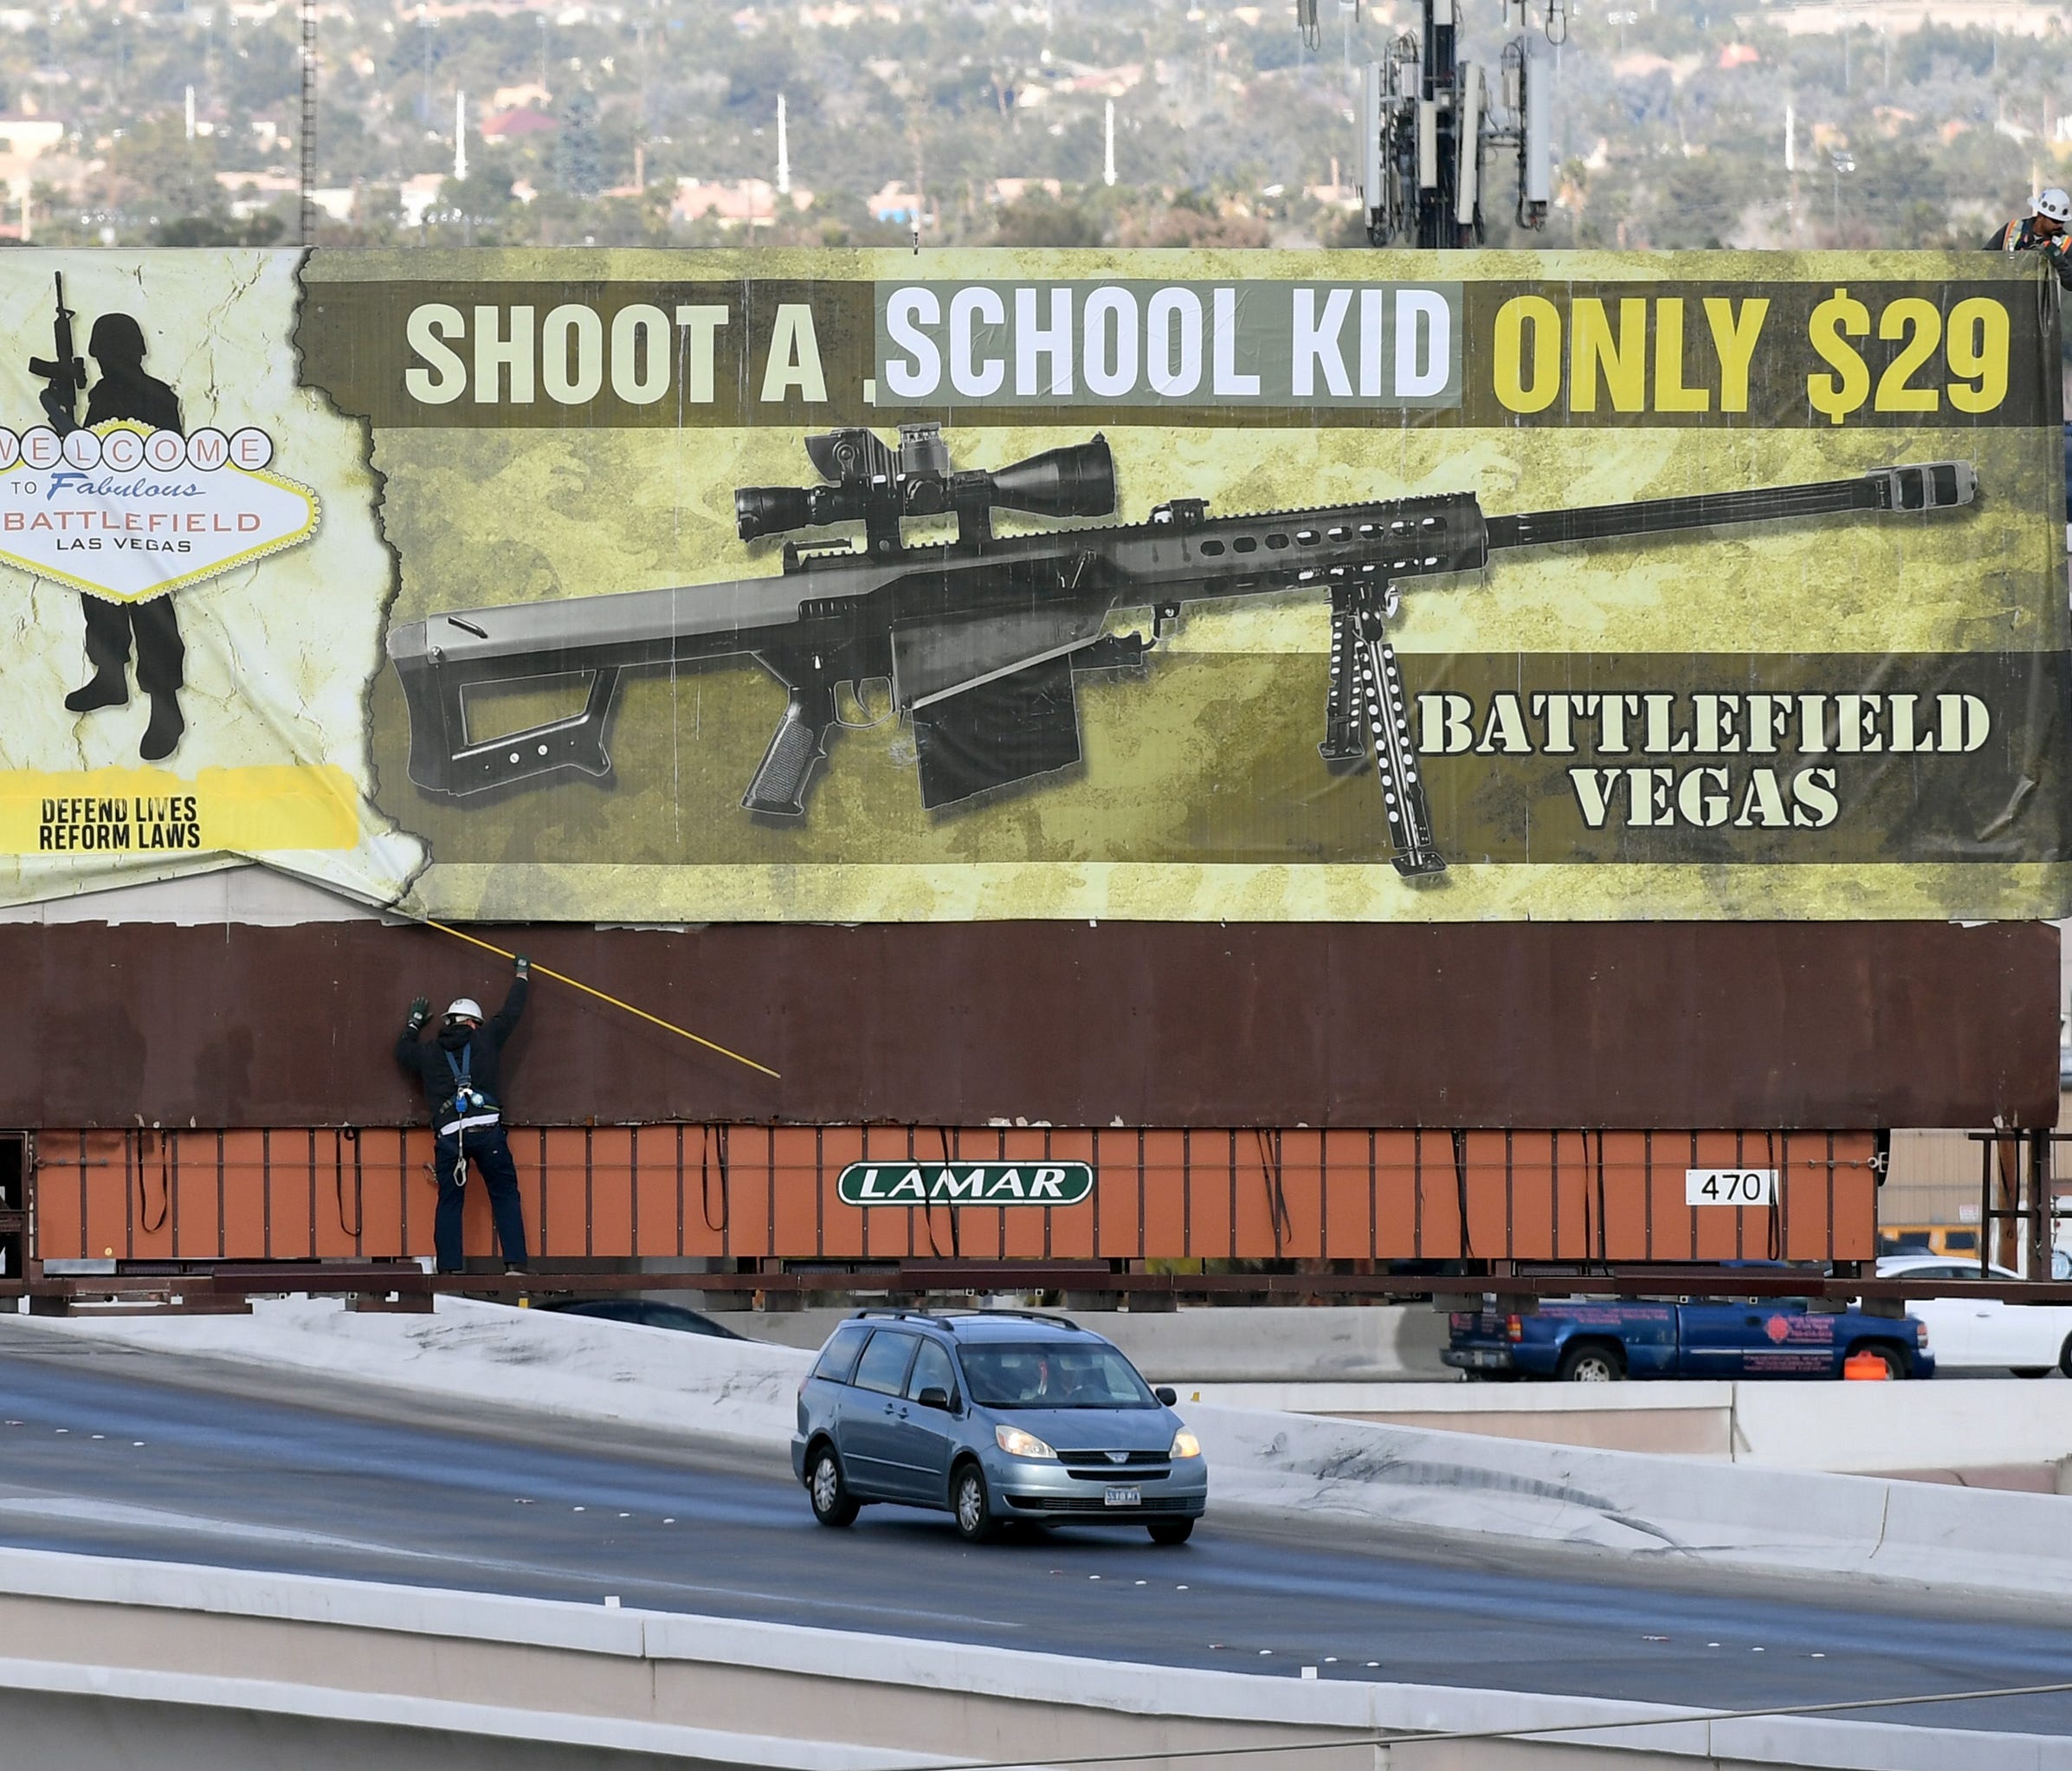 Workers are pictured removing a billboard poster for the Battlefield Vegas shooting range after it was vandalized.